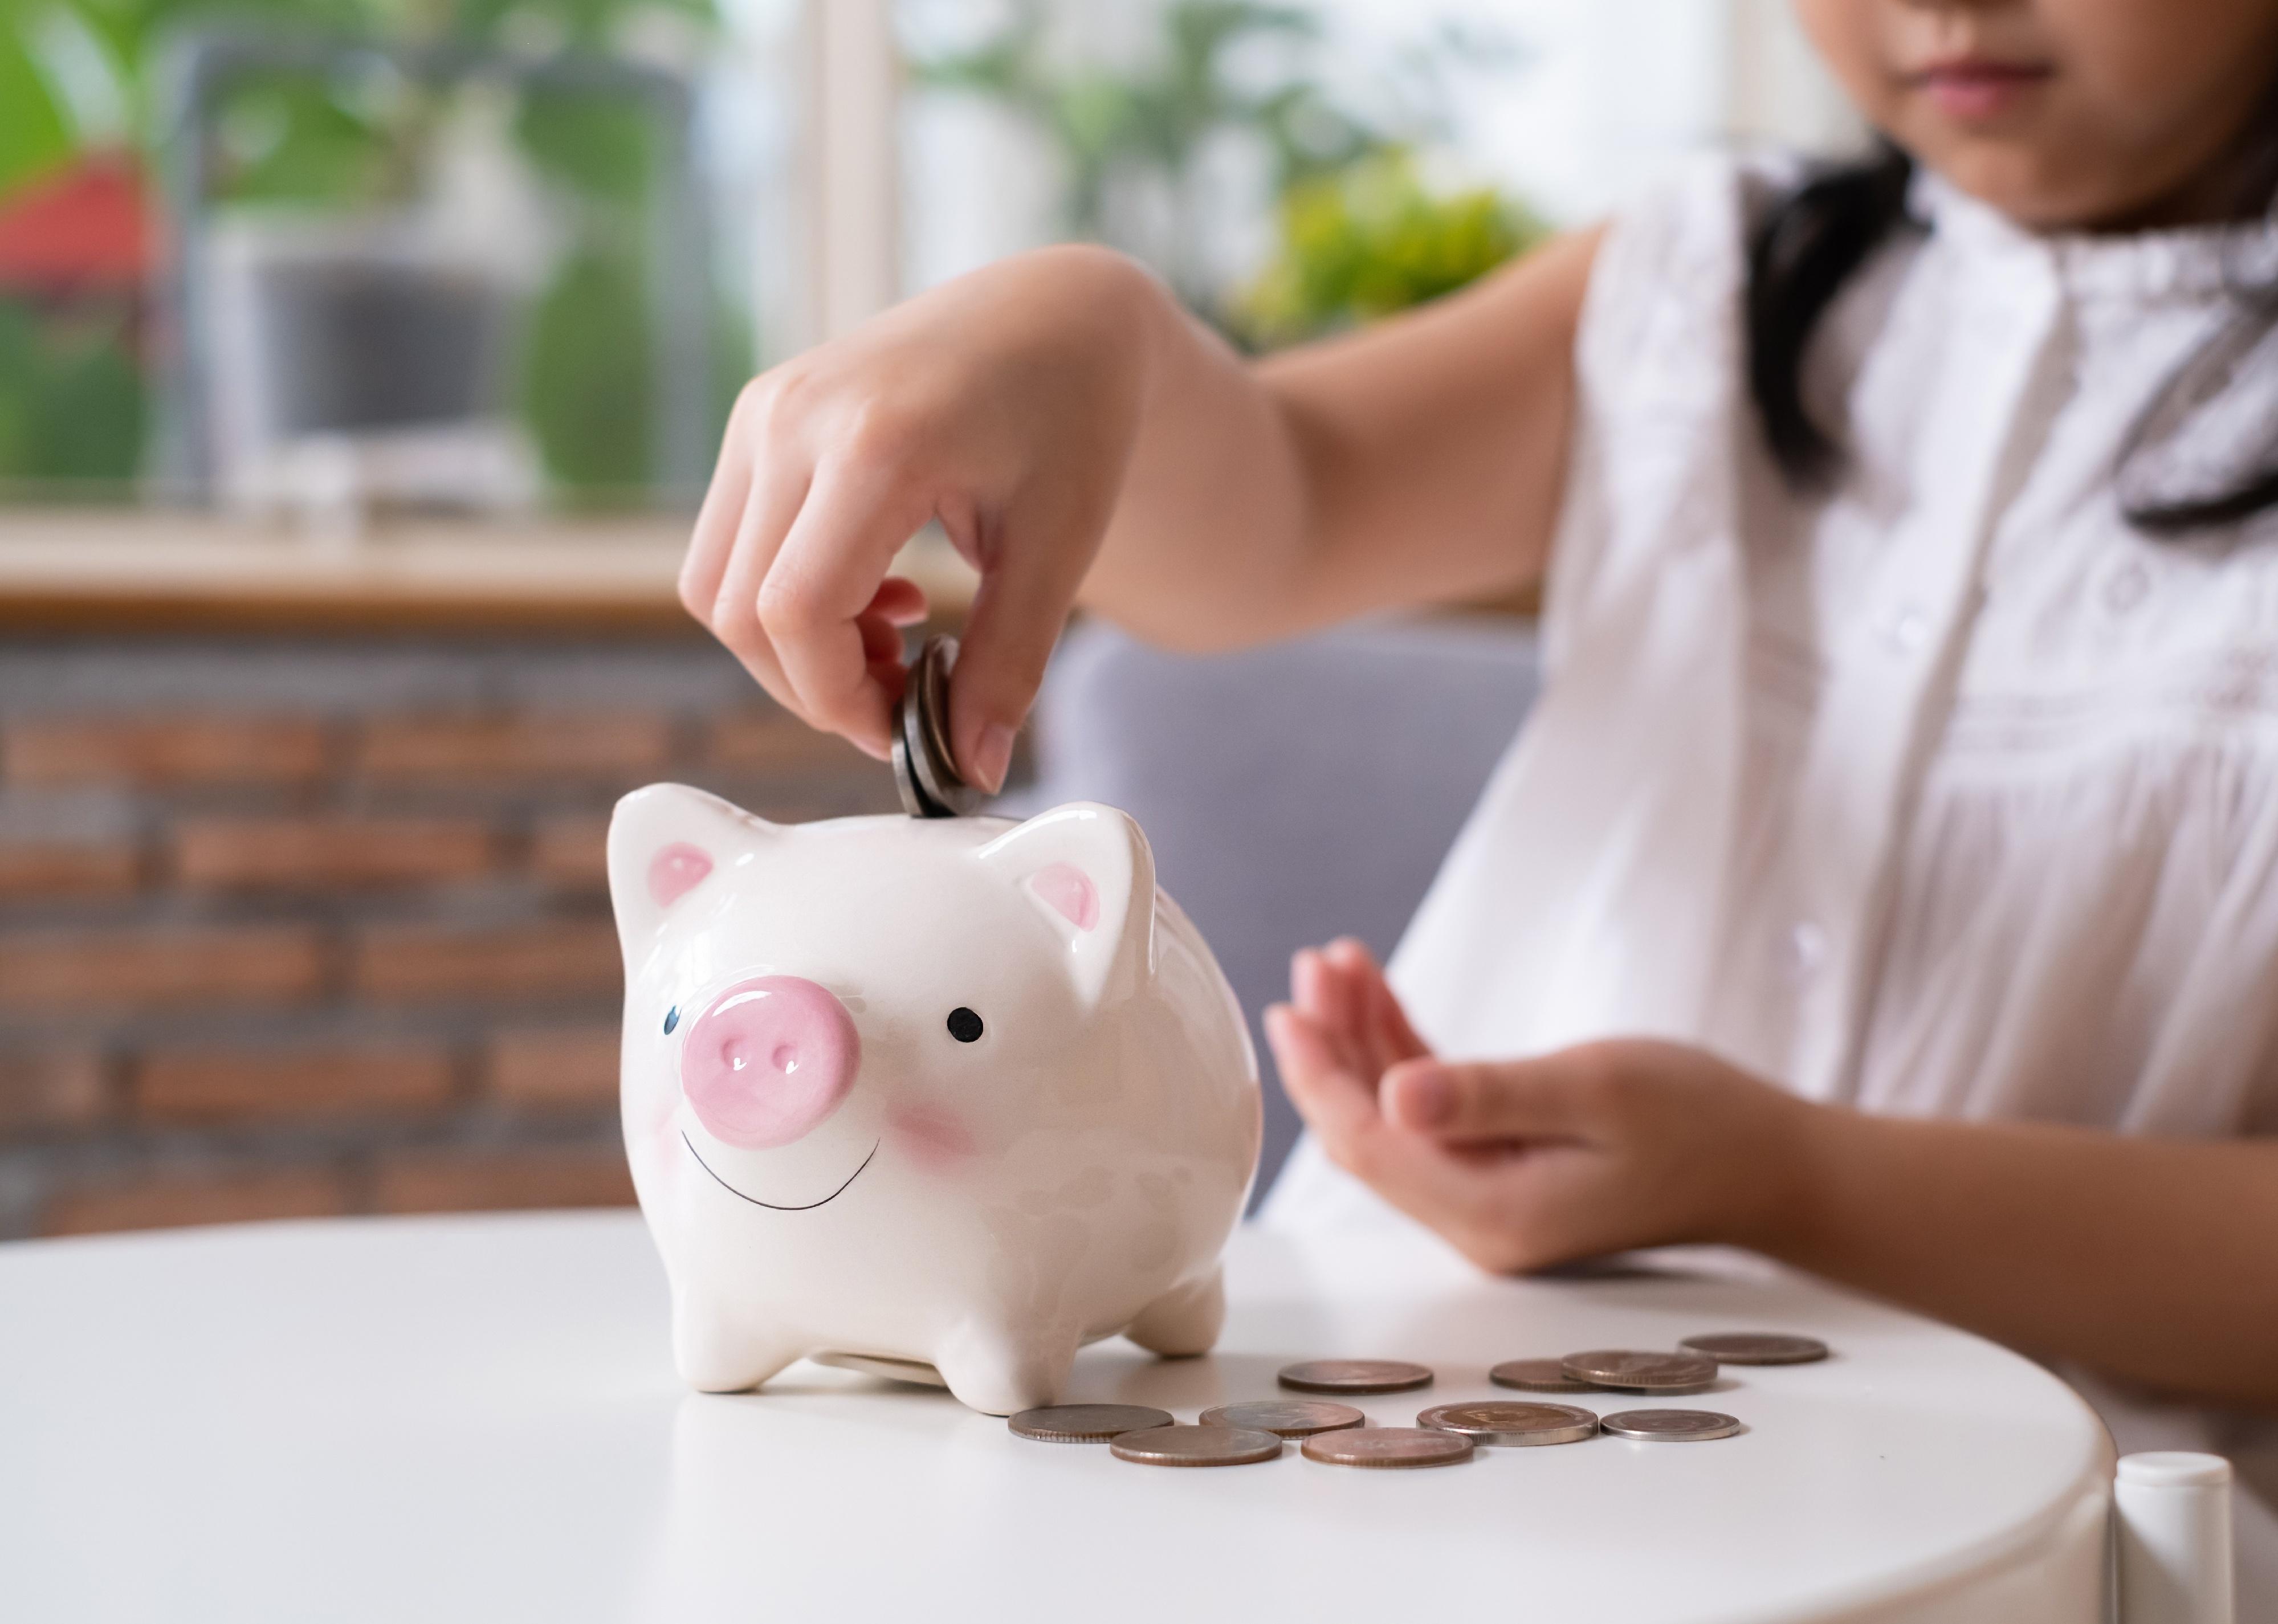 Selective focus of a piggy bank while young girl puts coin in.